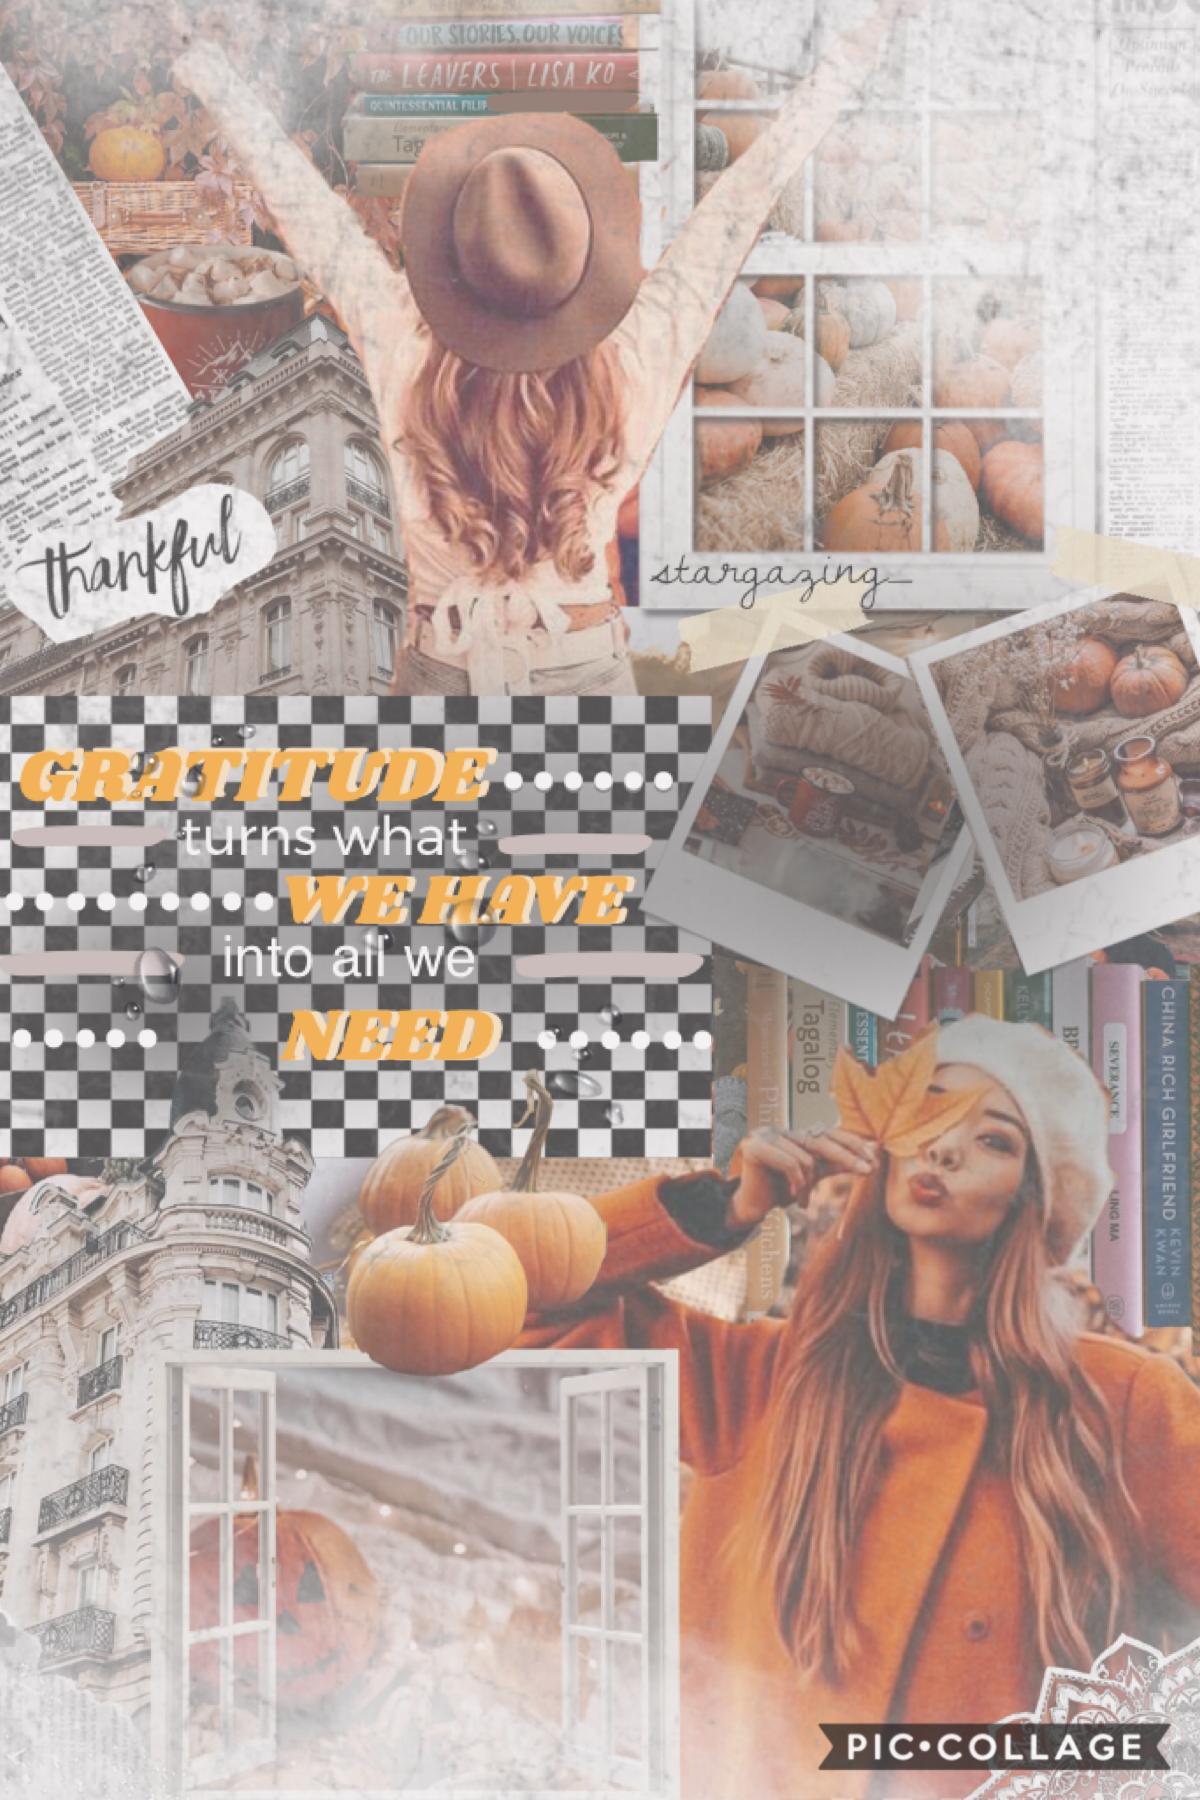 tap 🍂🍁
hey everyone 💥 Actually really proud of this one 🧡 how’s life going for you guys? QOTD: fav fruit? AOTD: 🍊 or 🍒